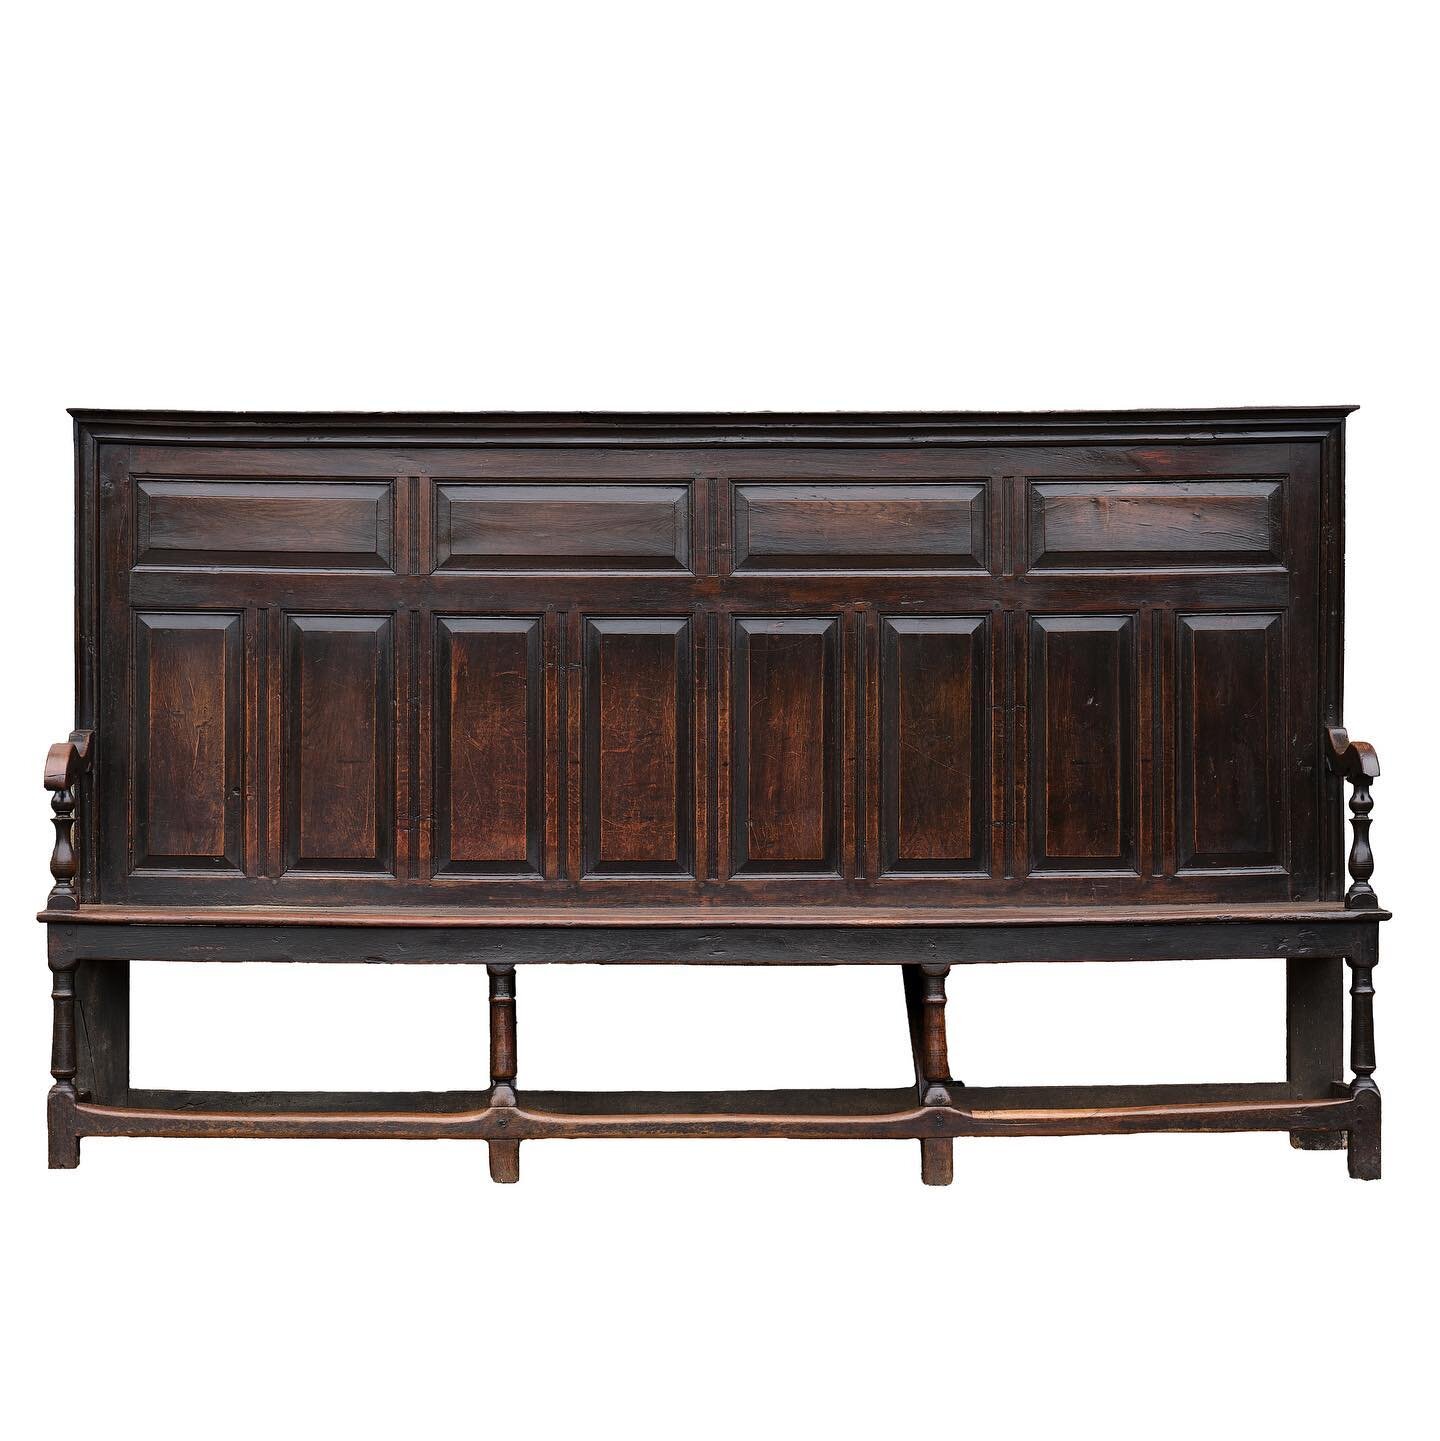 A magnificent dated Welsh high back oak settle.

Most unusually, there are initials and a date in tiny lettering,inscribed into the centre of the top rail just beneath the moulding &ldquo;E. W. 1745&rdquo;.

The settle is for sale at &pound;3,950. Pl